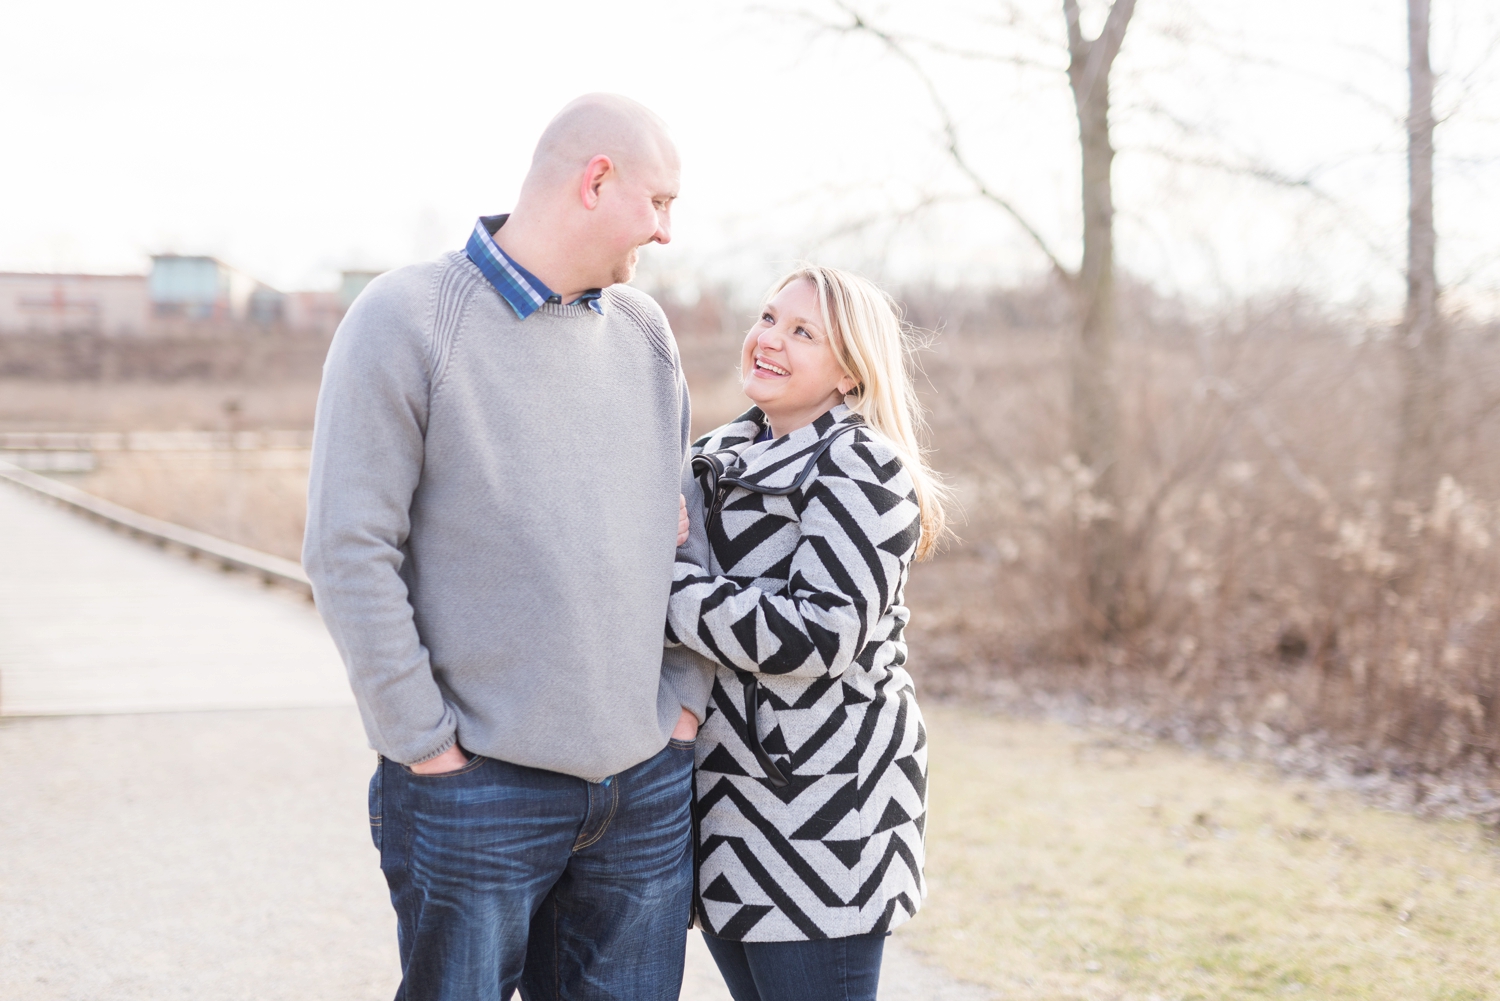 winter-engaged-couple-at-their-photo-session-at-the-scioto-audubon-park-near-grange-audubon-center-with-walkways-and-grass_0312